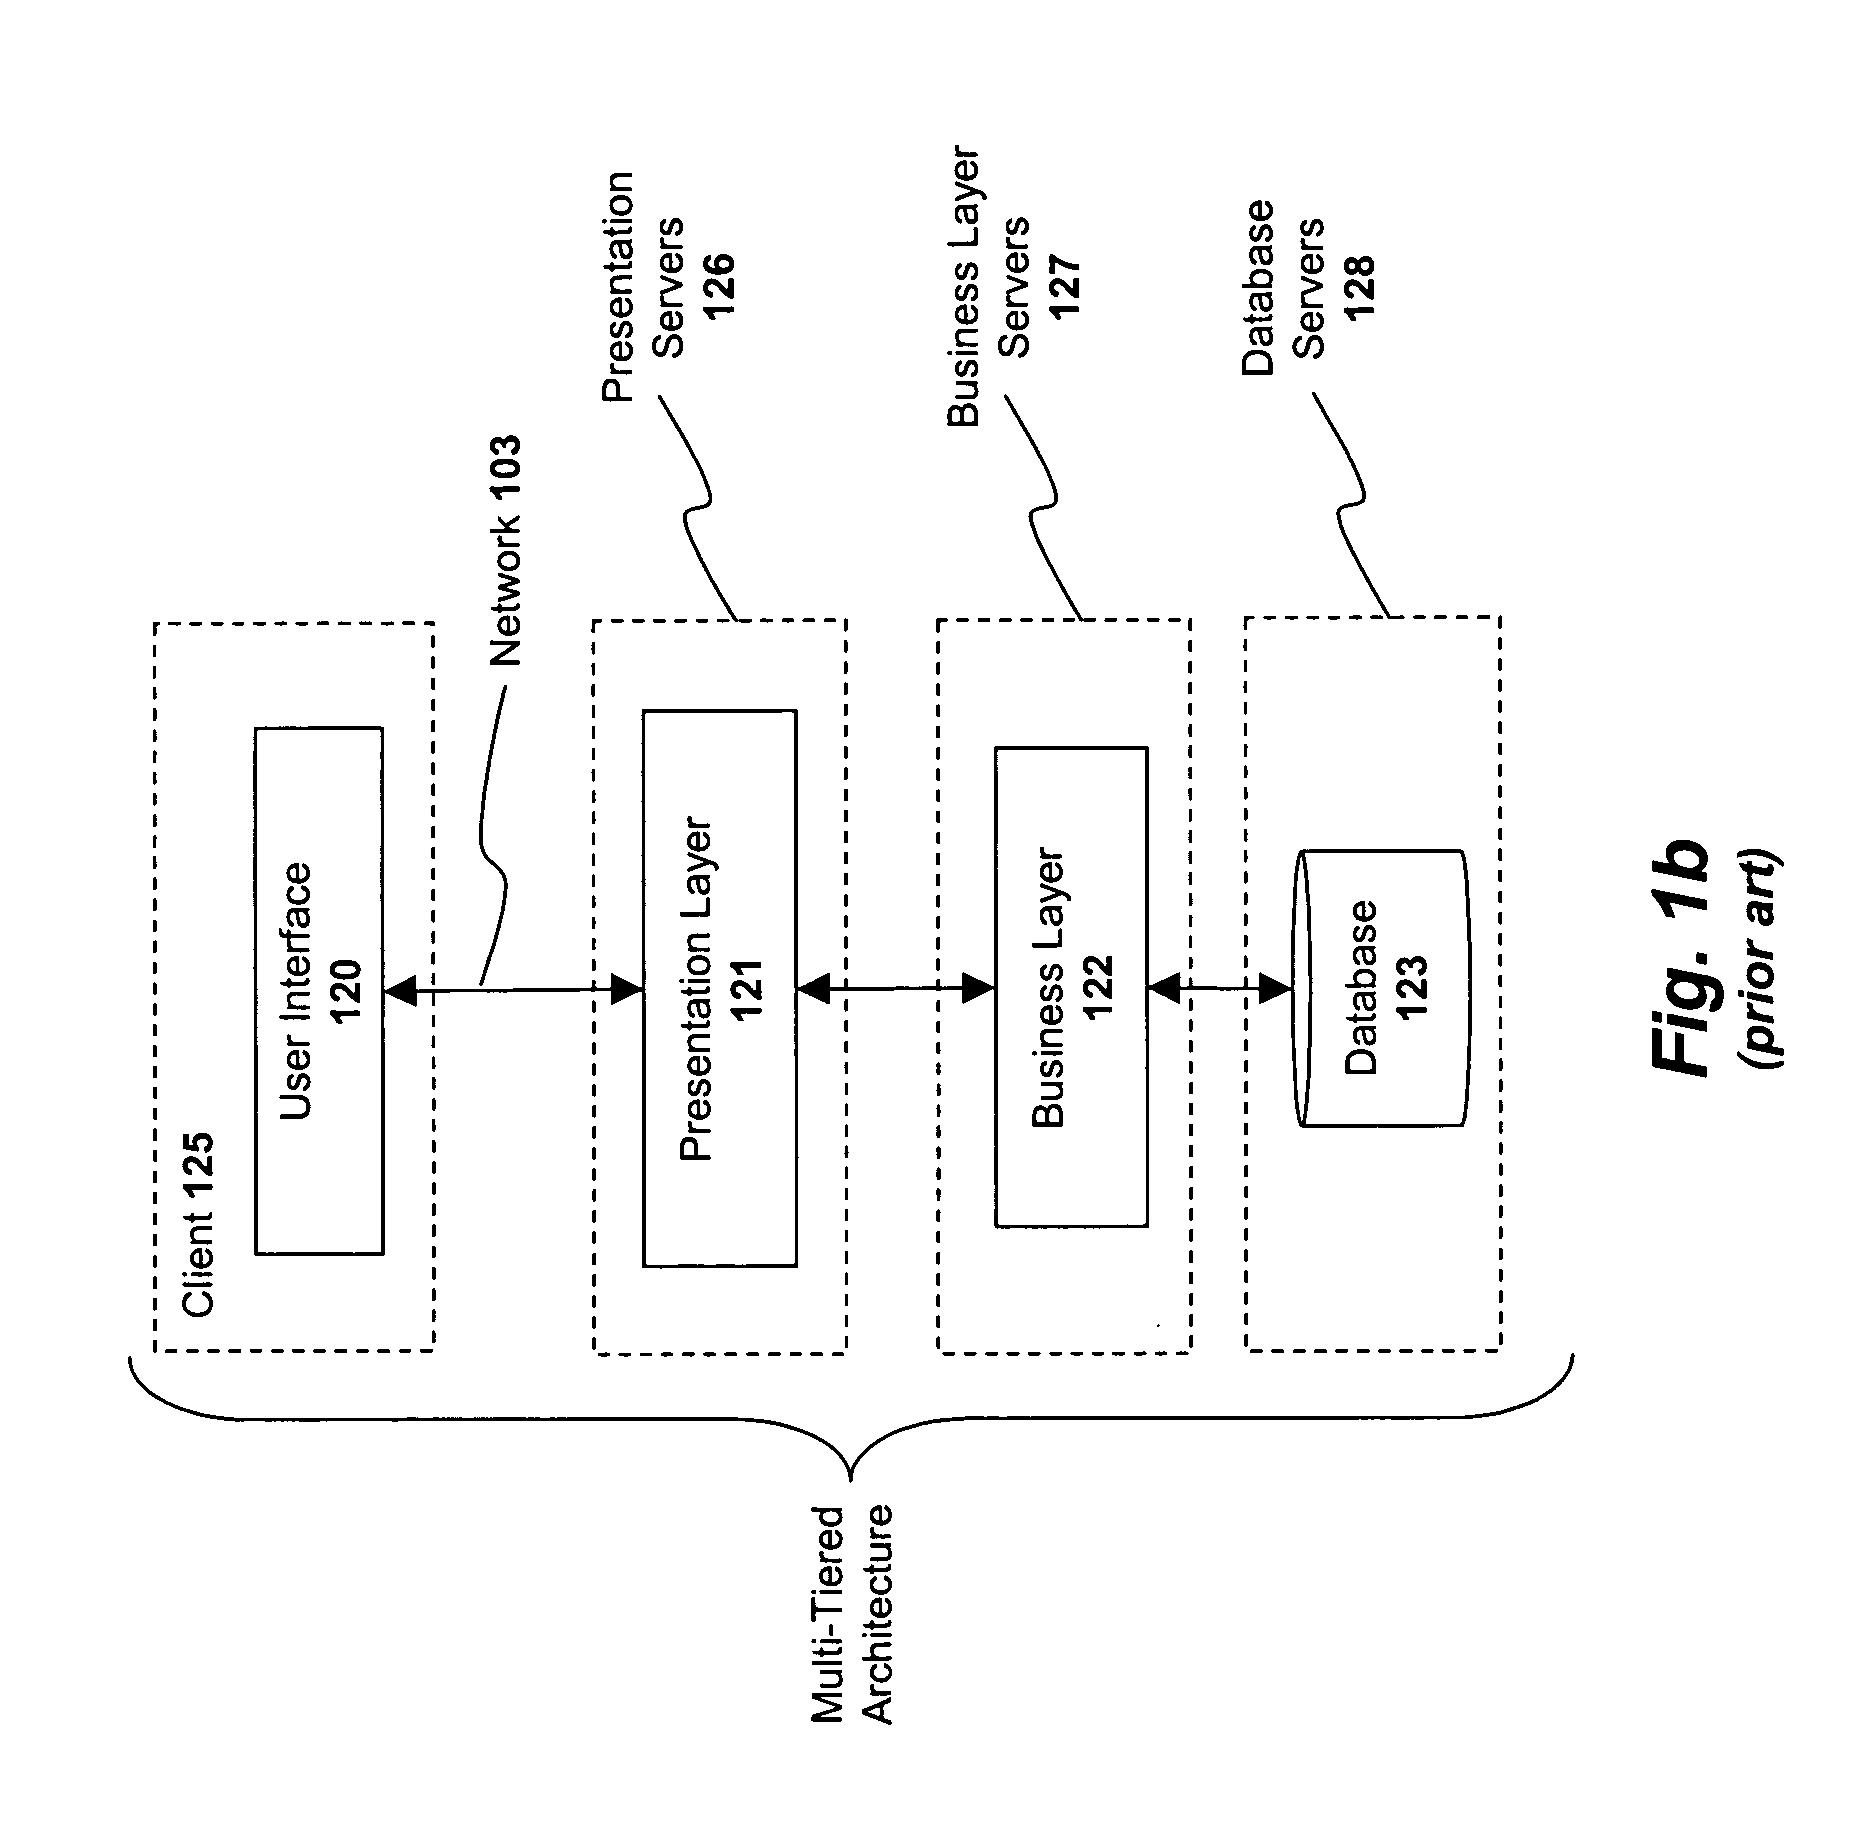 System and method for managing multiple application server clusters using a hierarchical data object and a multi-parameter representation for each configuration property